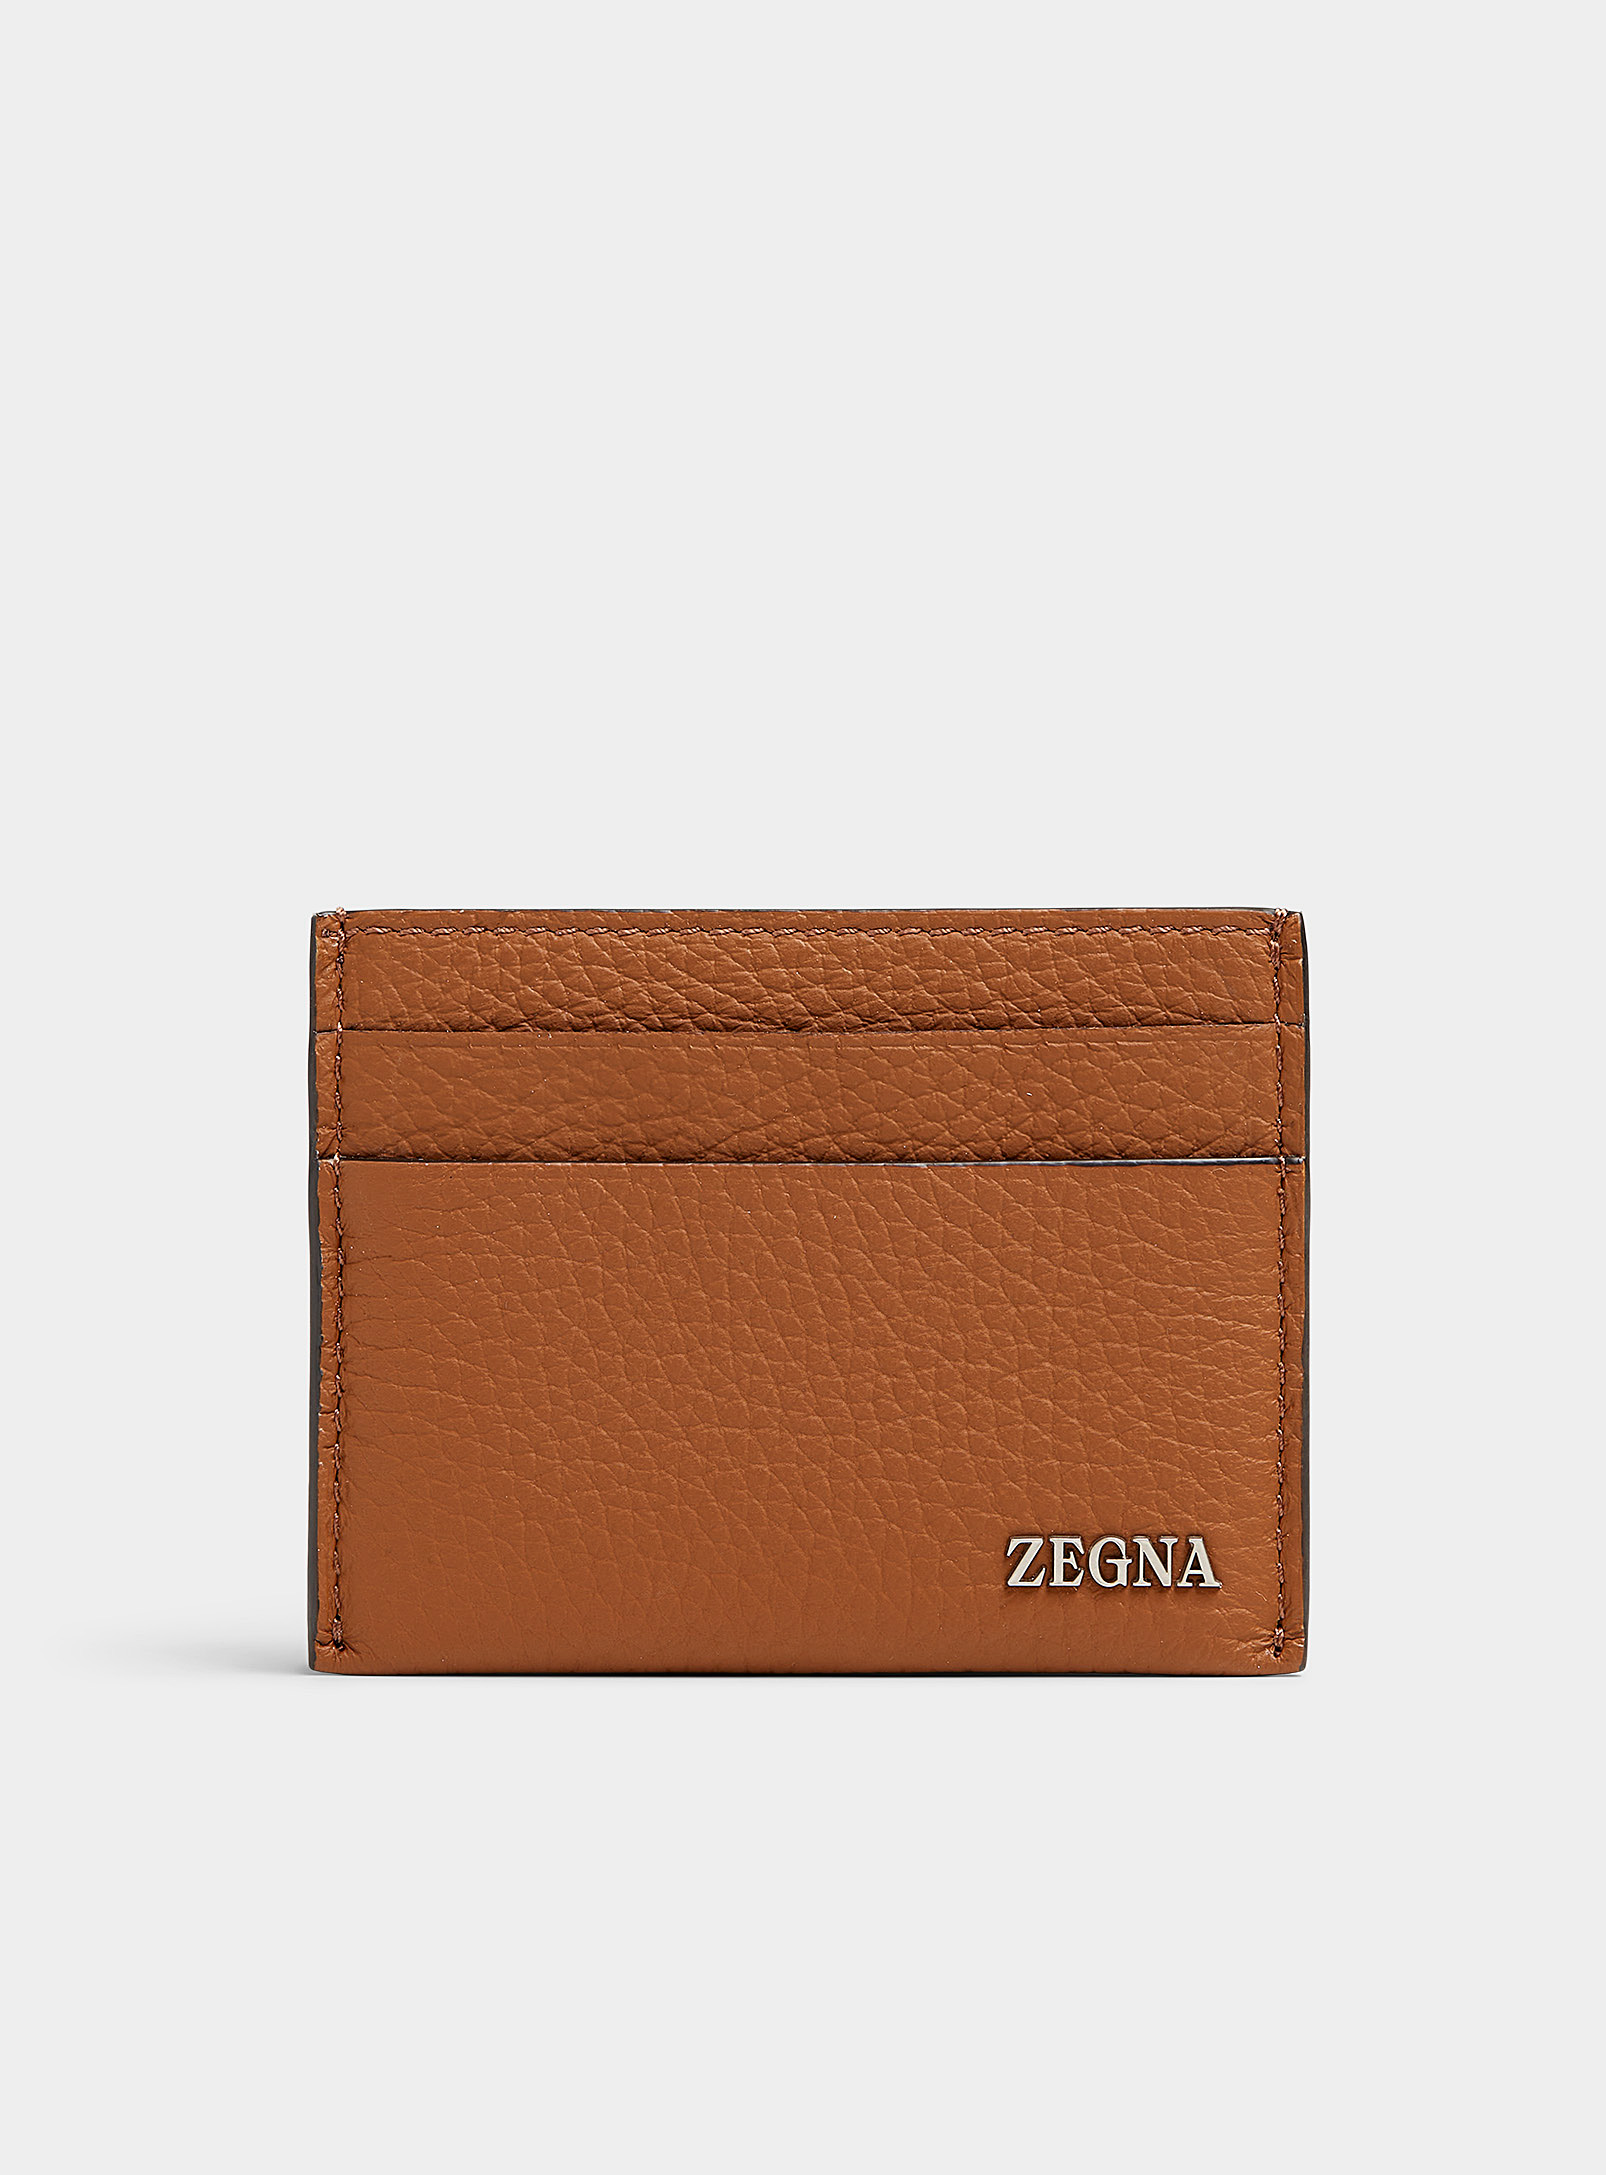 Zegna Grained Leather Card Case In Copper